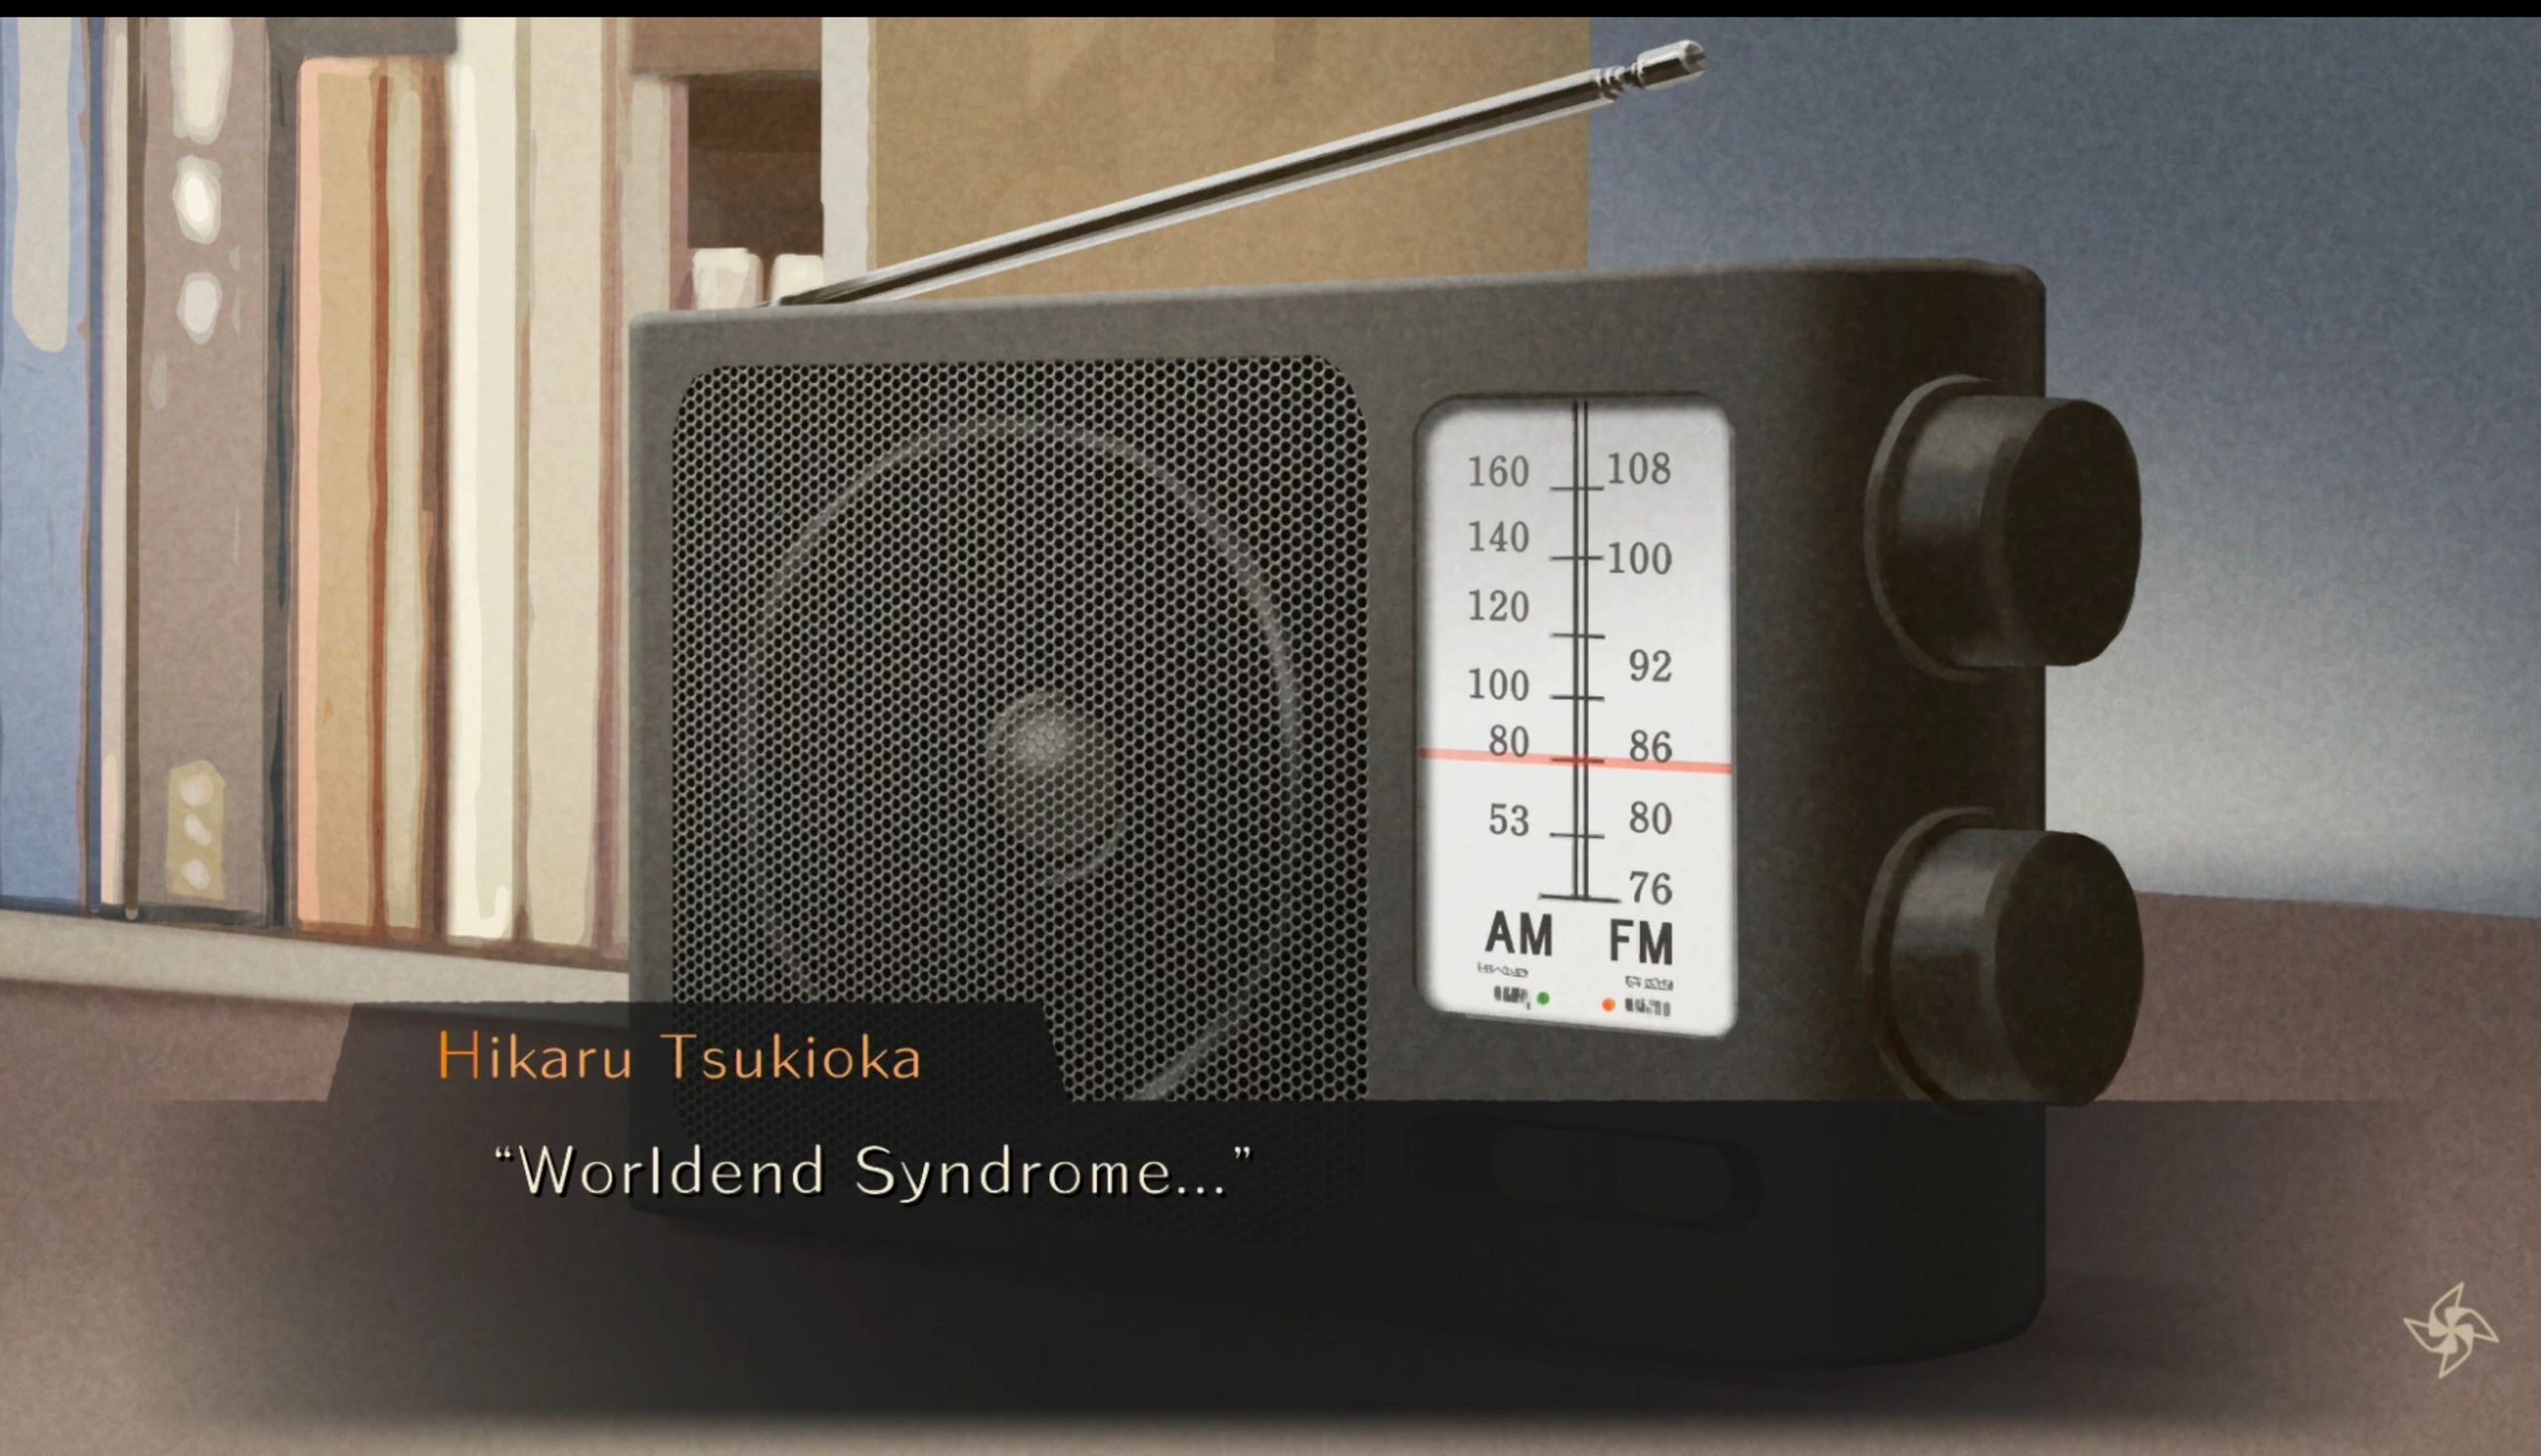 REVIEW: World End Syndrome - oprainfall